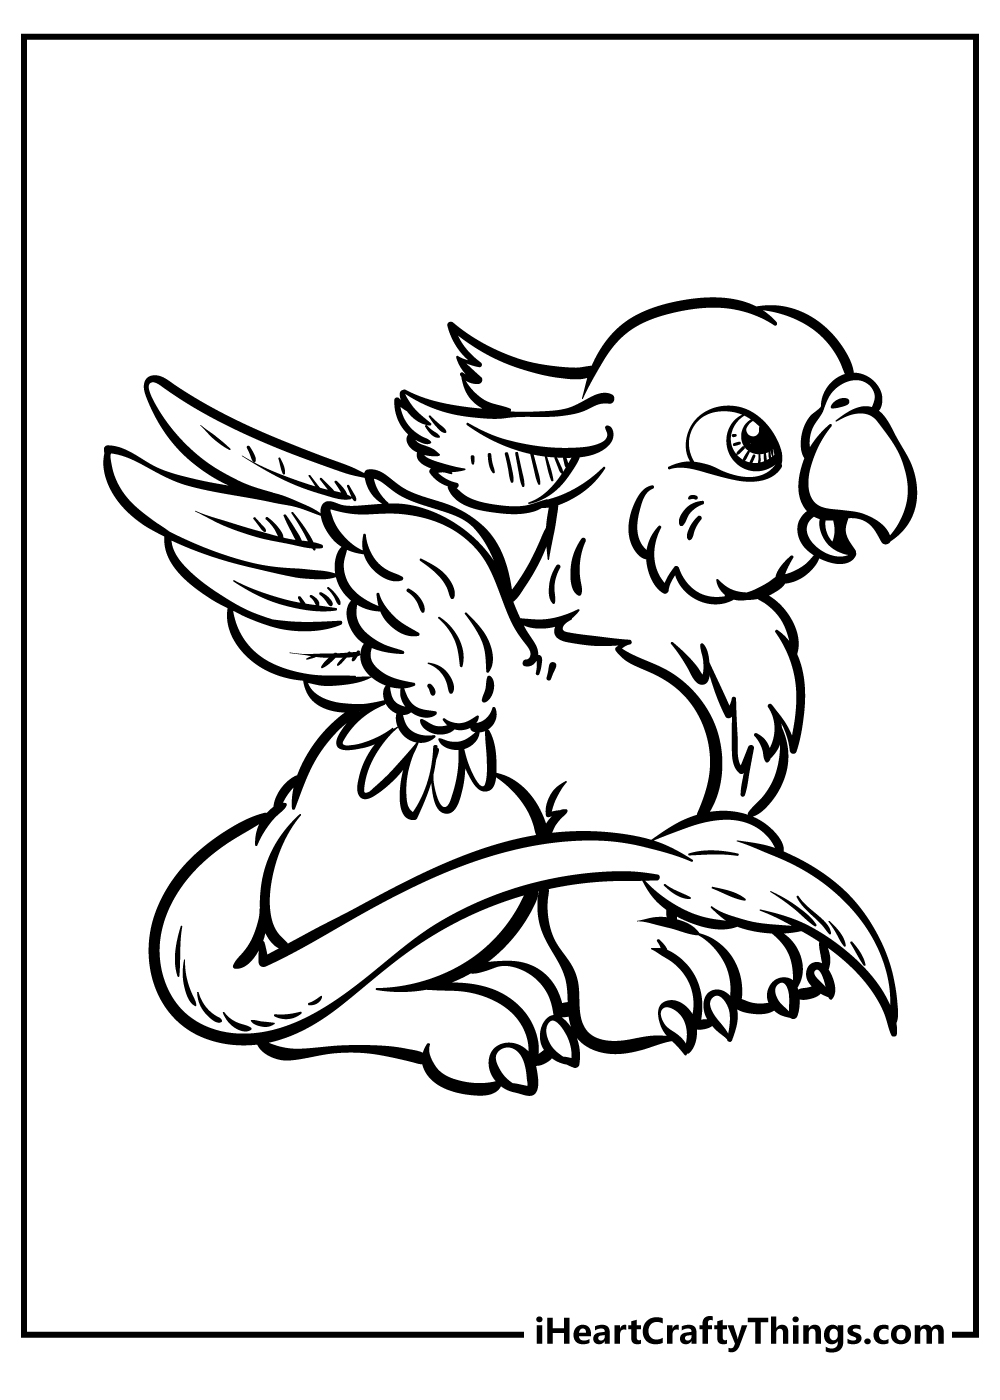 Griffin Coloring Original Sheet for children free download